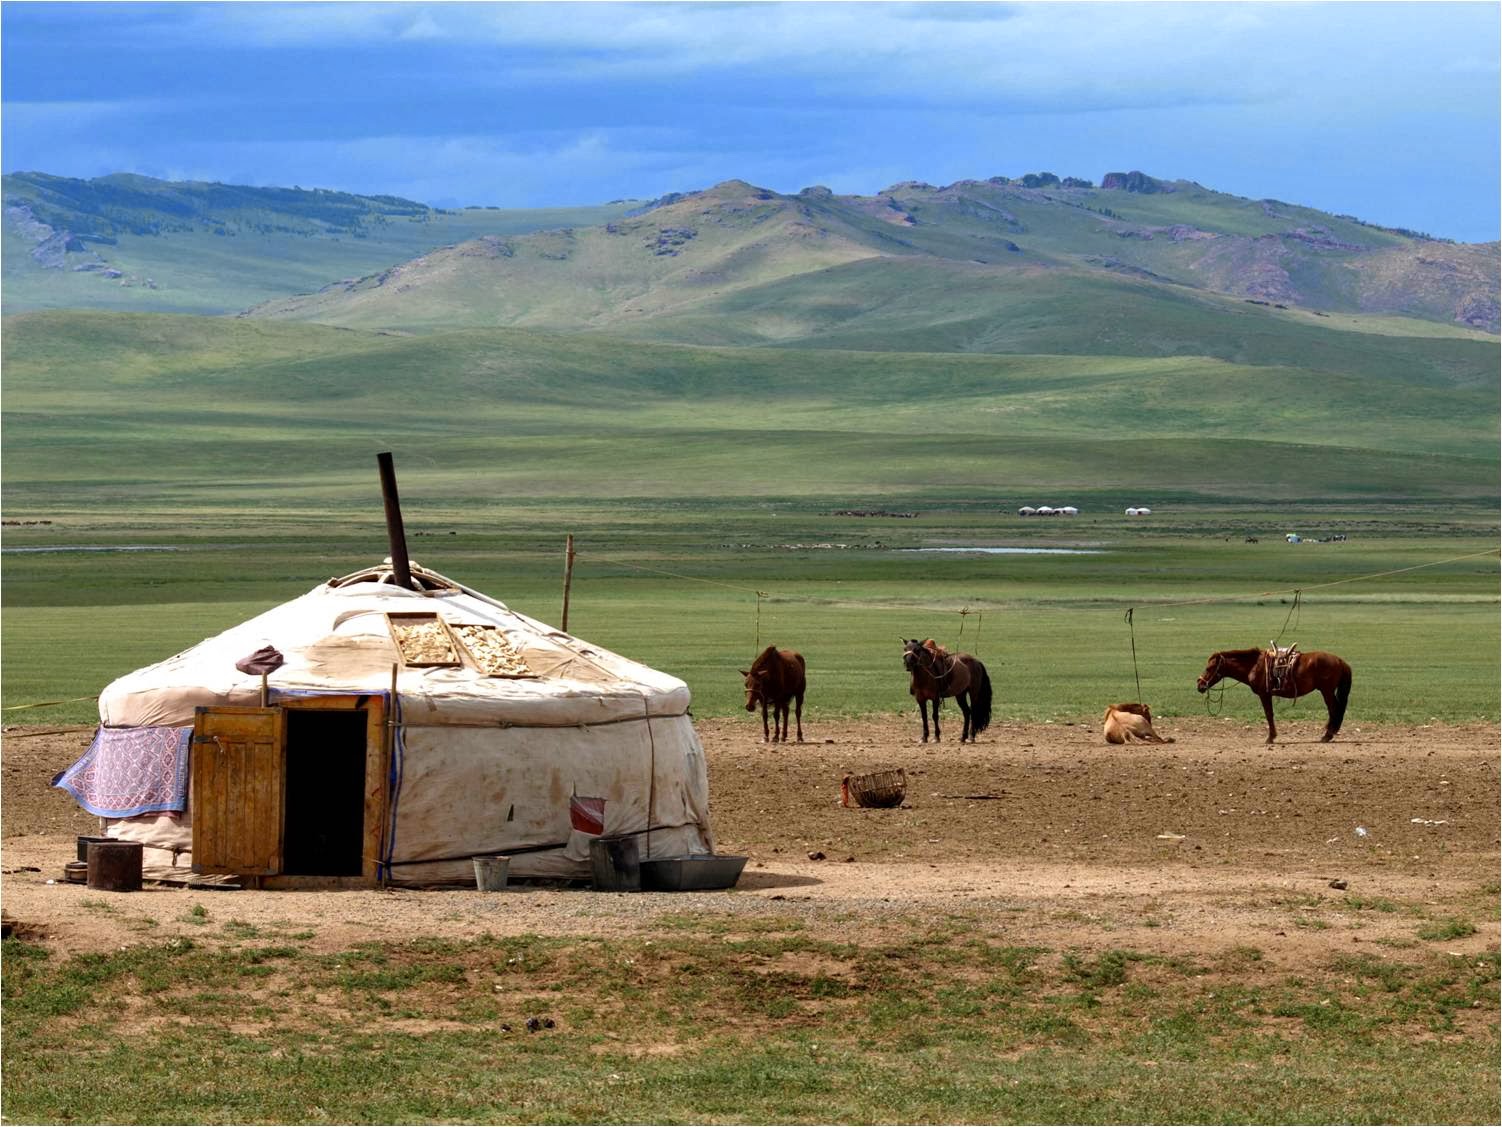 Eternal Landscapes Mongolia - Blogging From The Wild: Mongolia's Ger